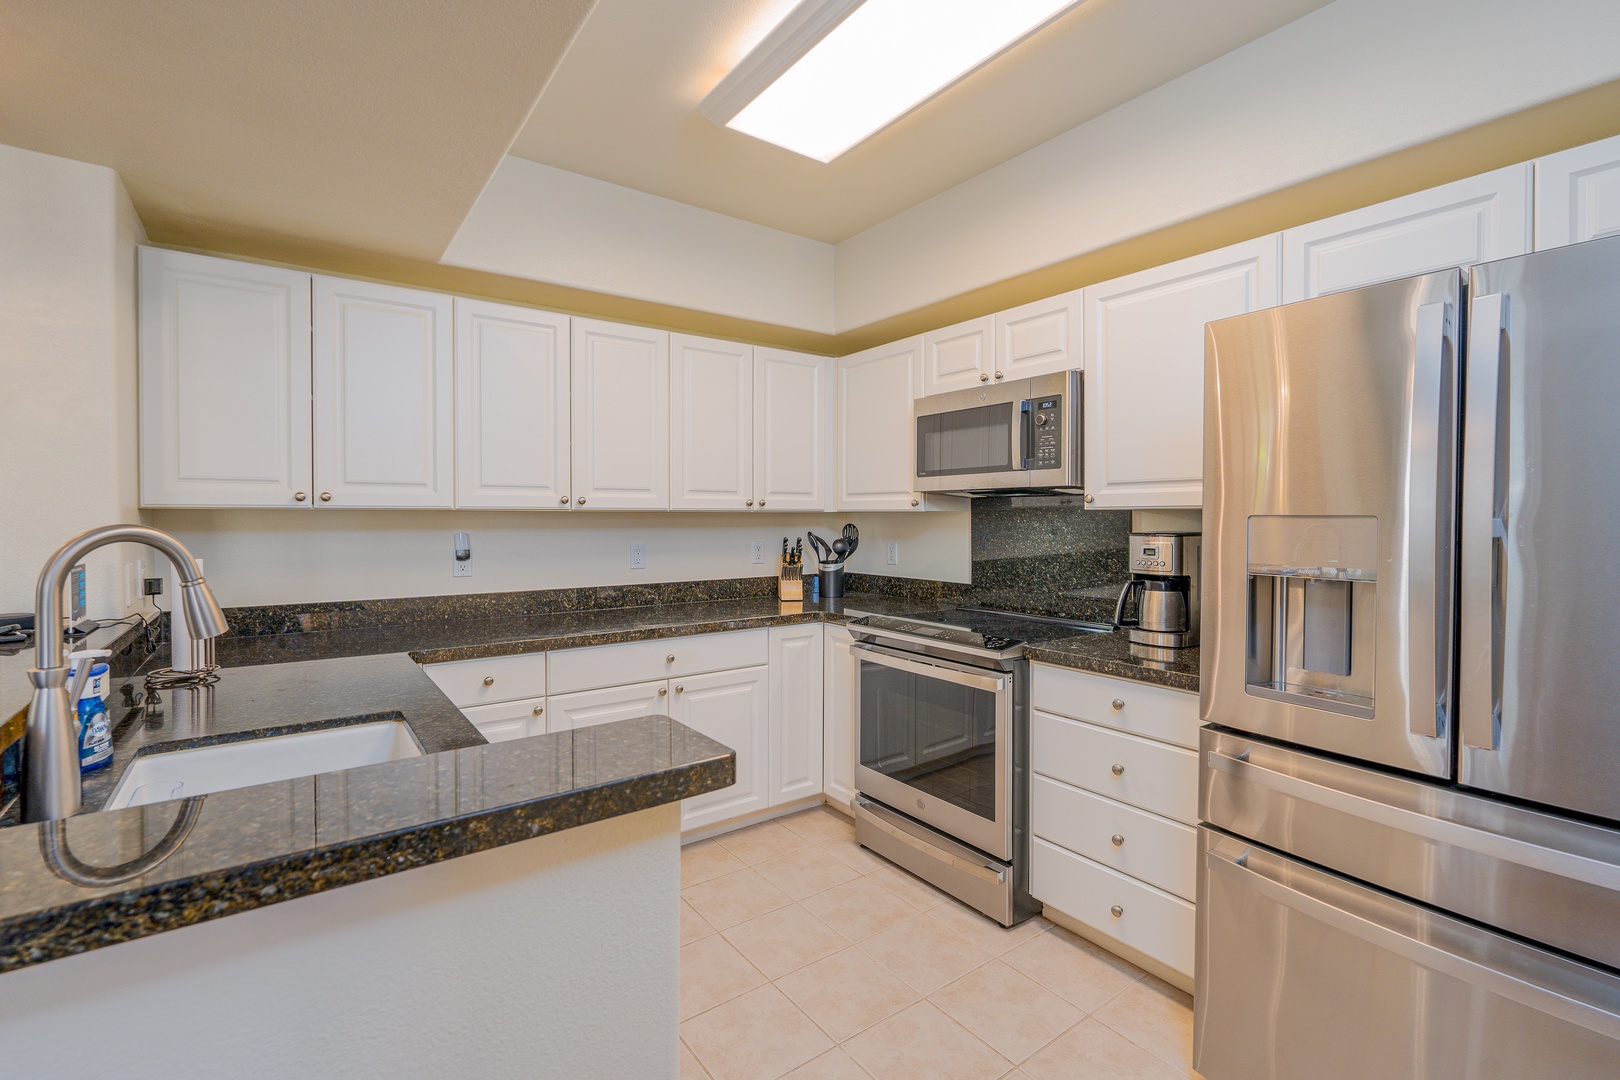 Kapolei Vacation Rentals, Ko Olina Kai 1105F - Fully-stocked kitchen with wide counter space and ample cabinetry for your culinary adventures.